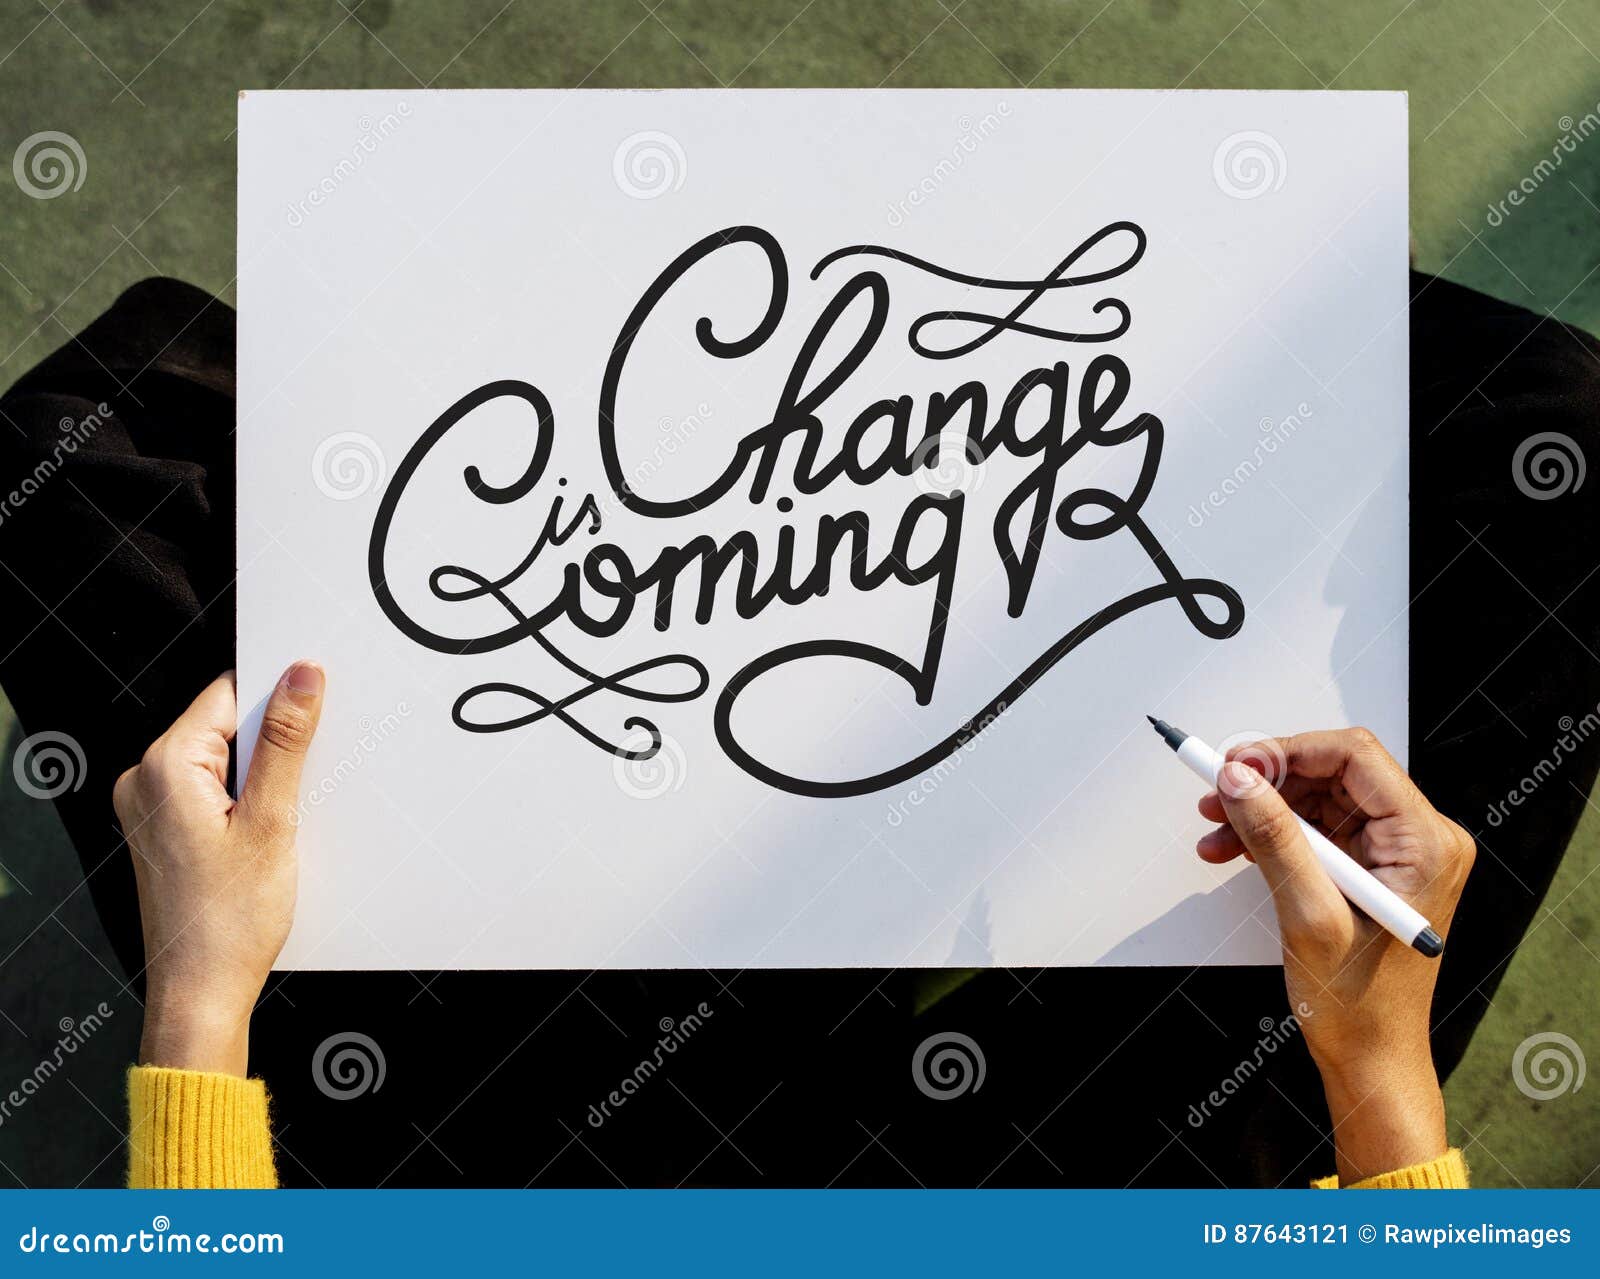 hand holding pen paper writing change is coming board concept